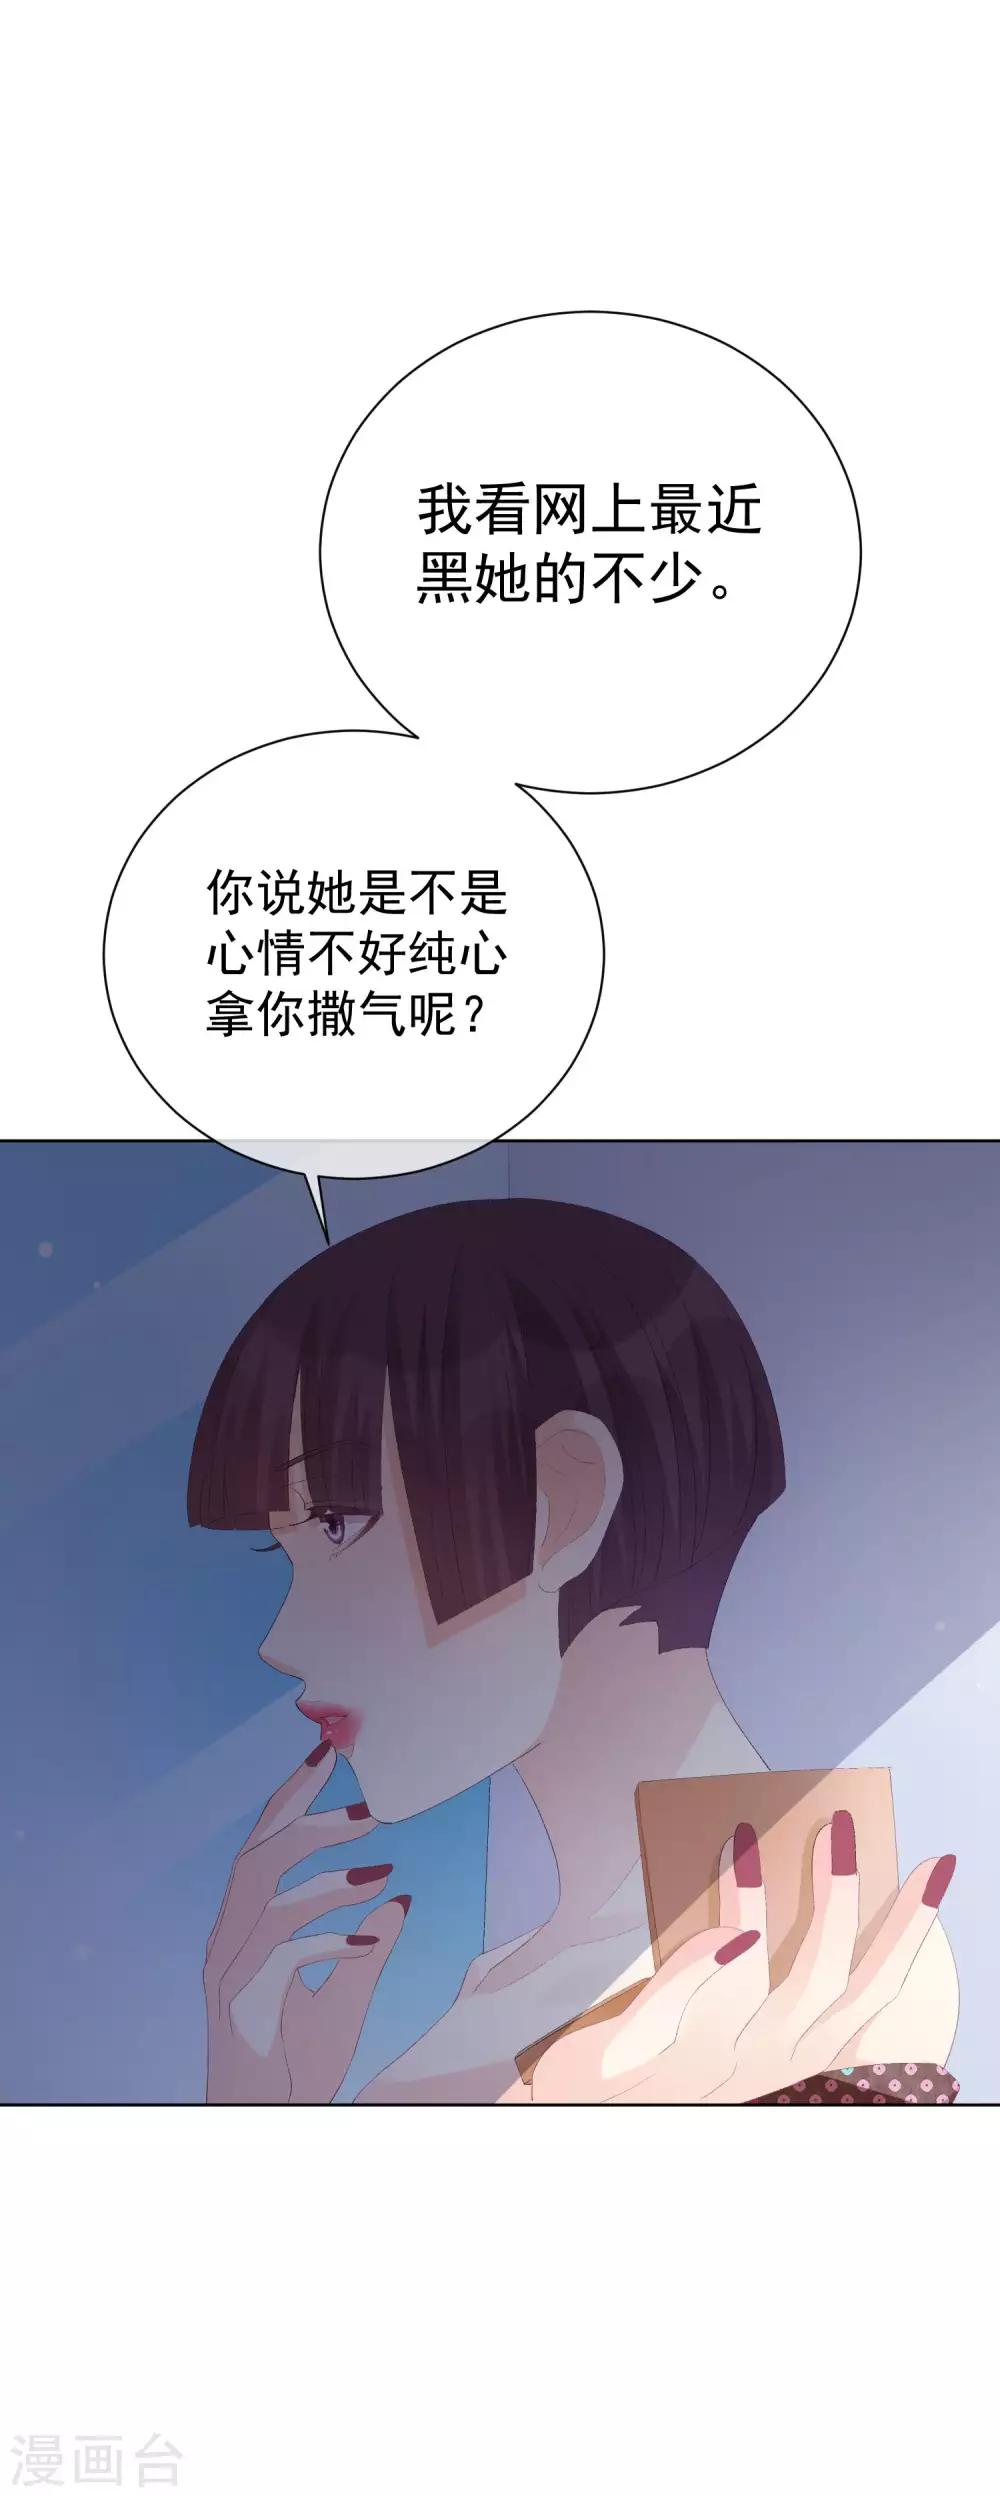 One Kiss A Day - 第36话 真正的她 - 6